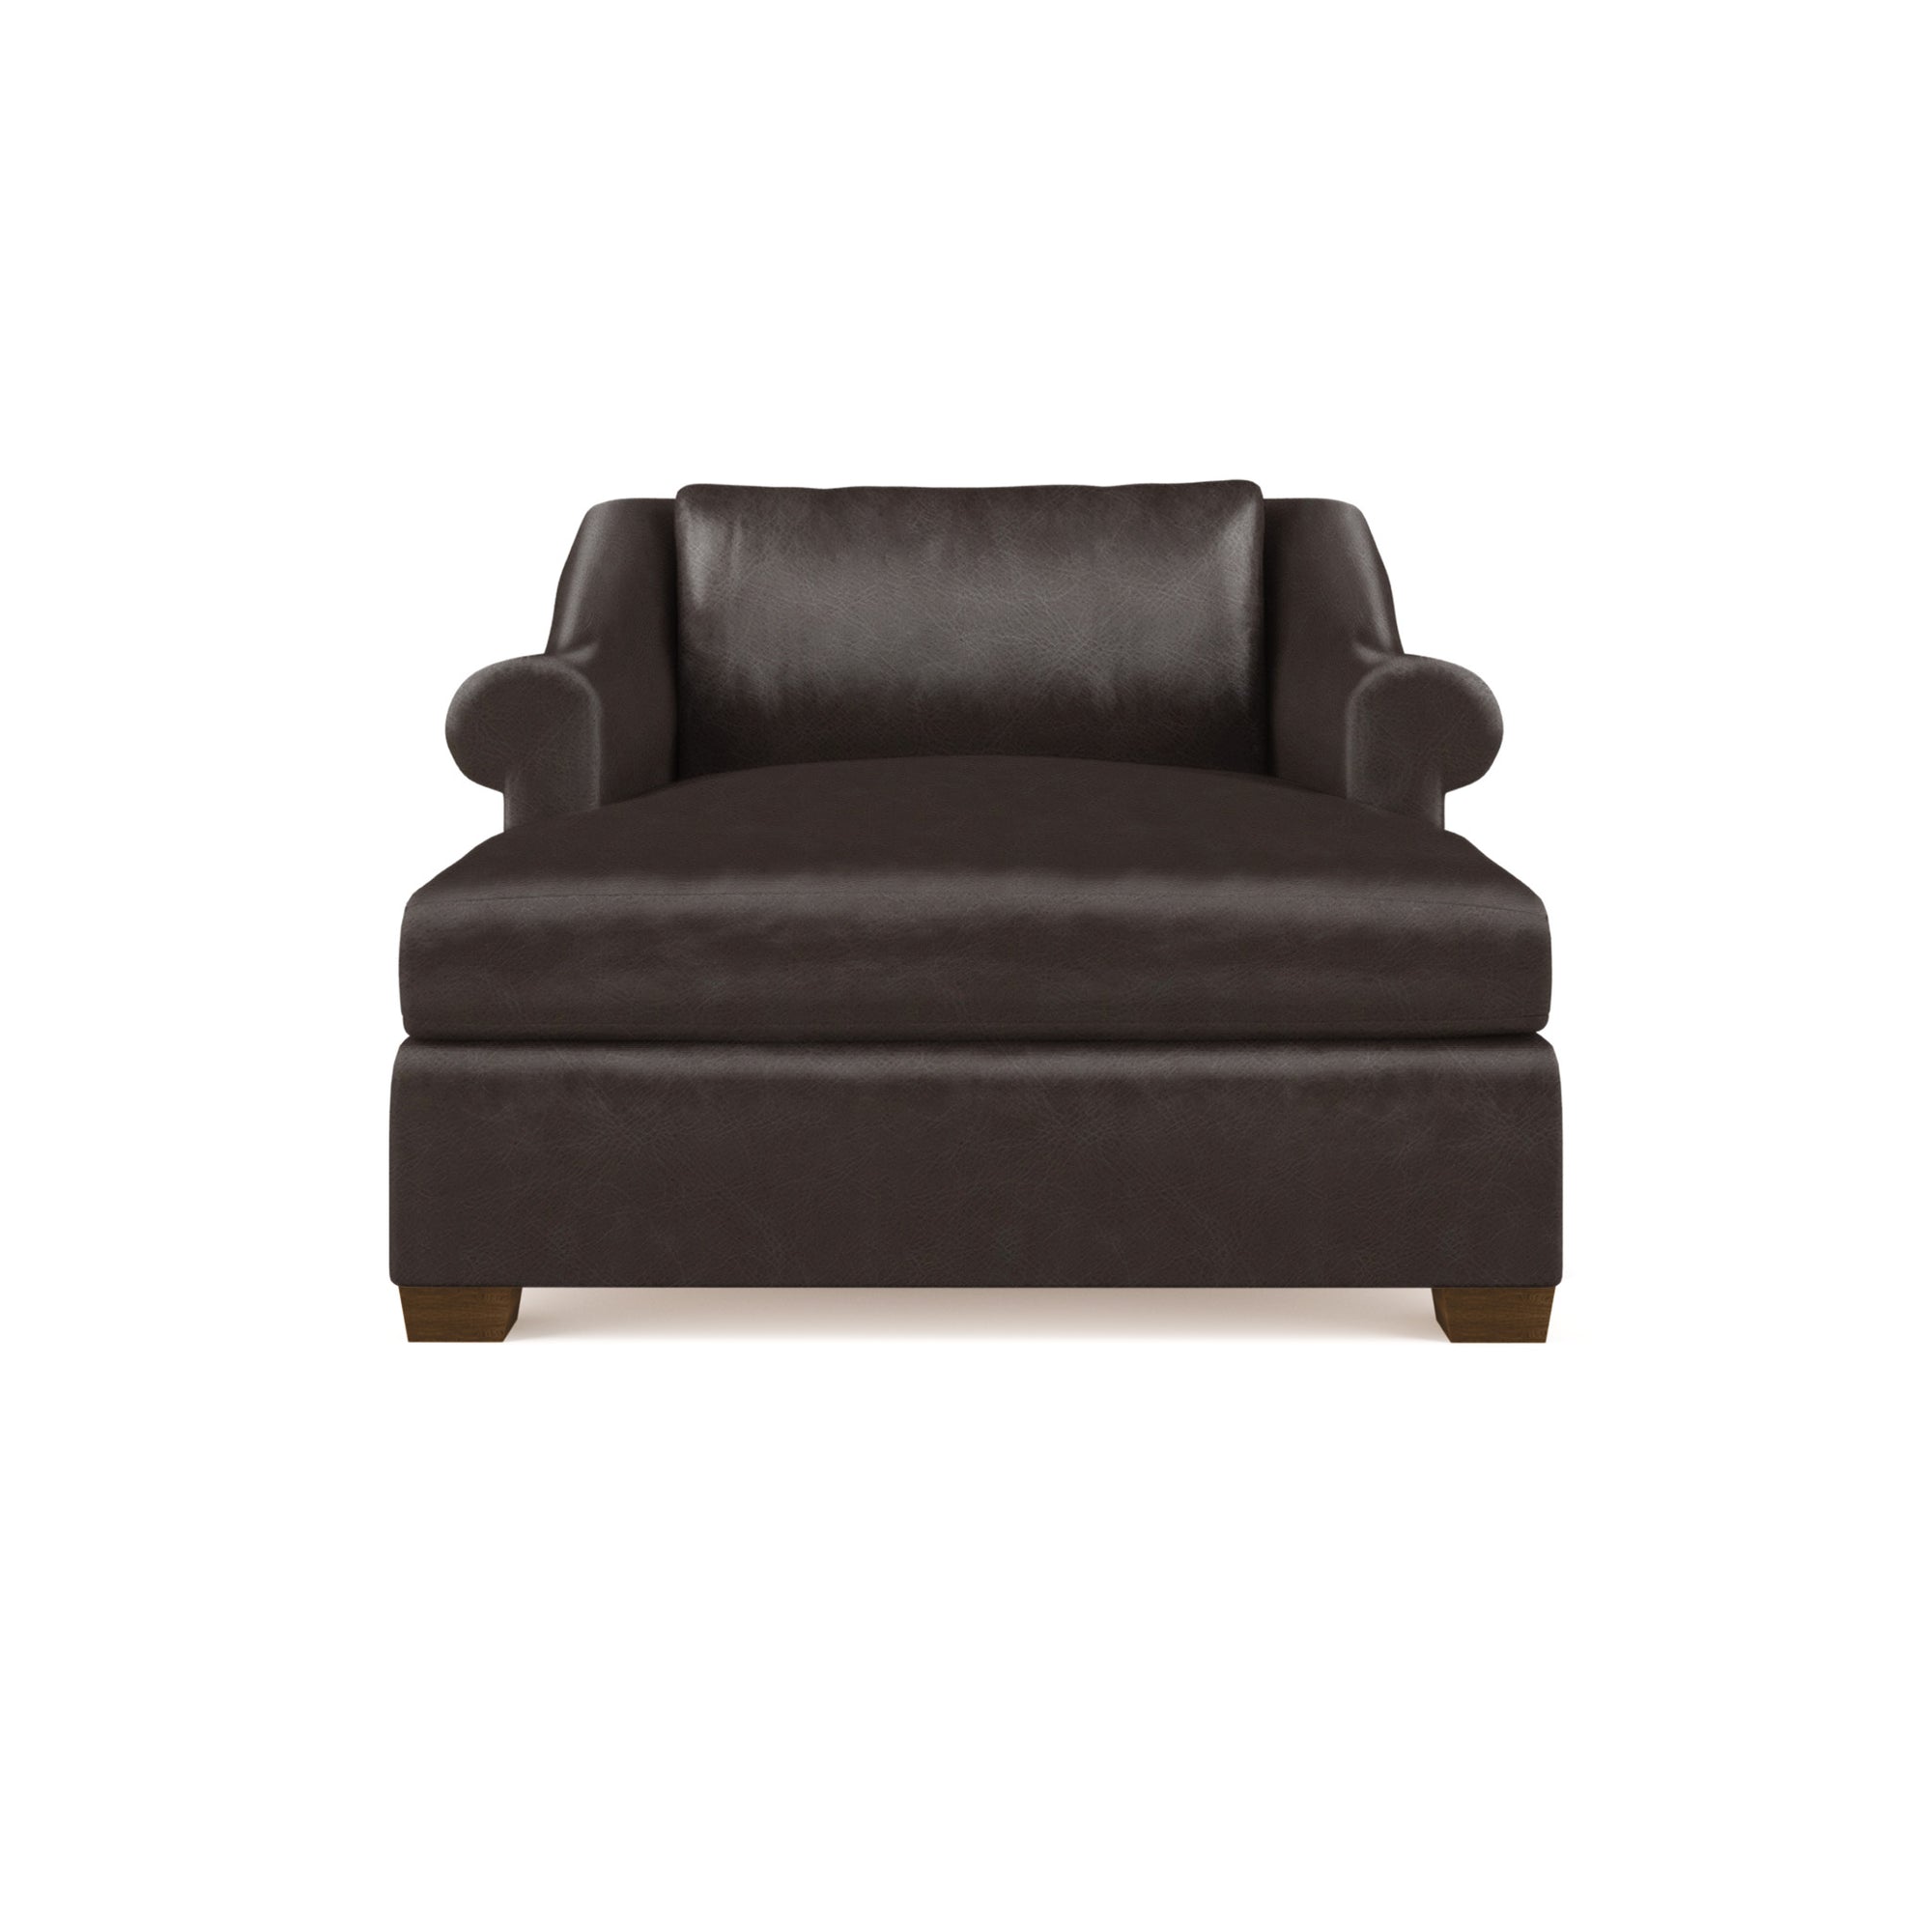 Thompson Chaise - Chocolate Vintage Leather